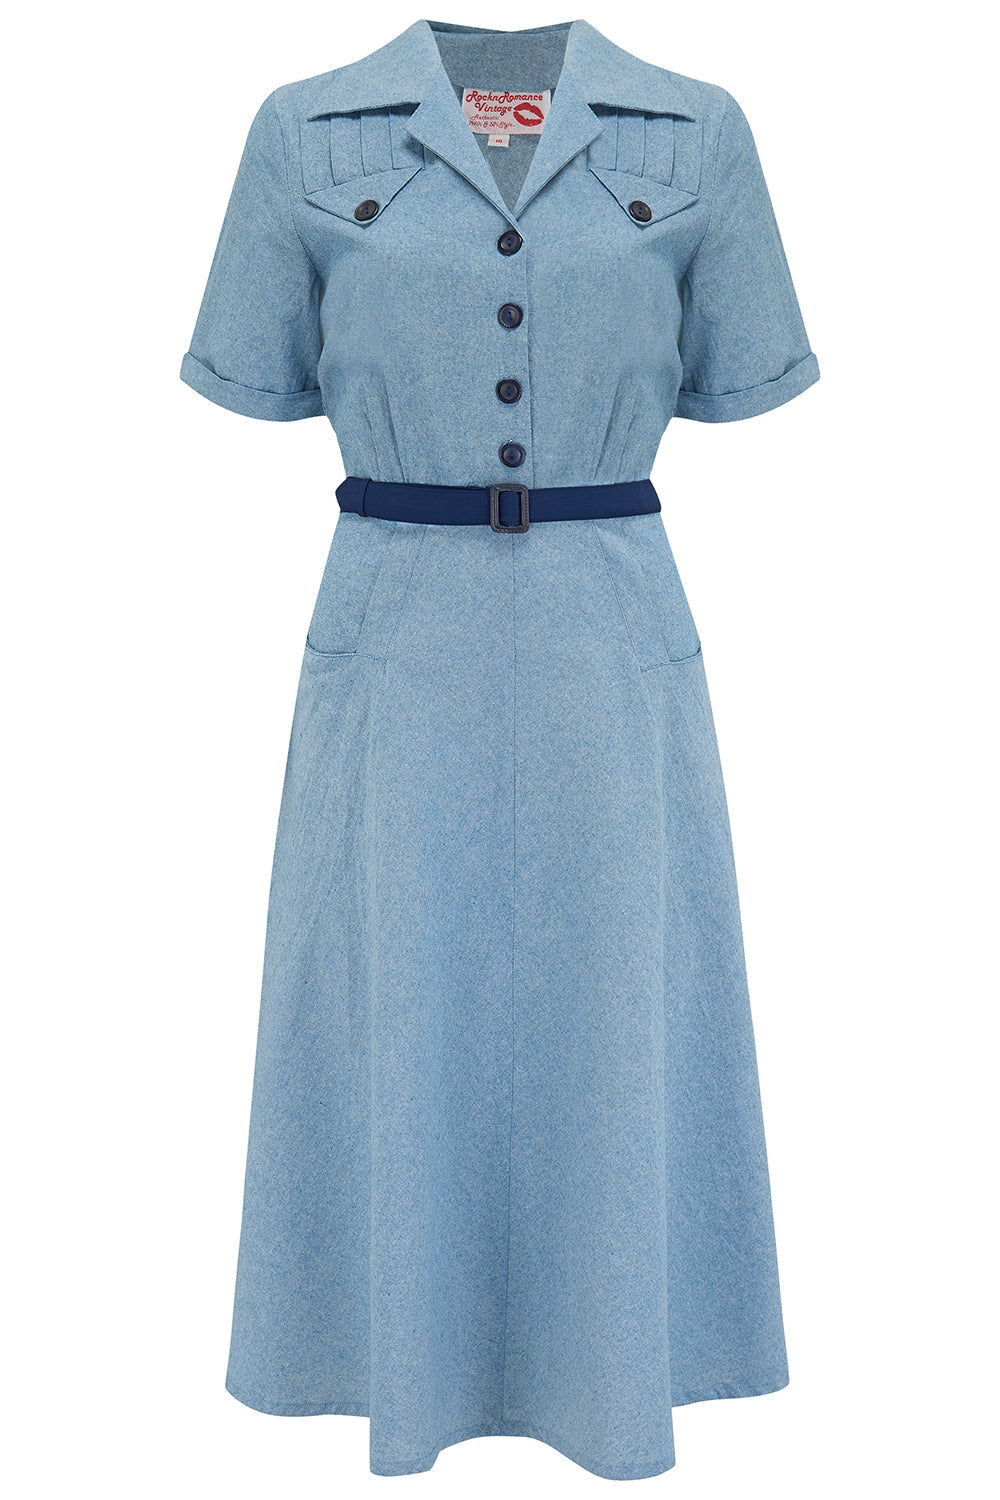 The "Polly" Dress in Lightweight Denim Cotton Chambray, True & Authentic 1950s Vintage Style - True and authentic vintage style clothing, inspired by the Classic styles of CC41 , WW2 and the fun 1950s RocknRoll era, for everyday wear plus events like Goodwood Revival, Twinwood Festival and Viva Las Vegas Rockabilly Weekend Rock n Romance Rock n Romance